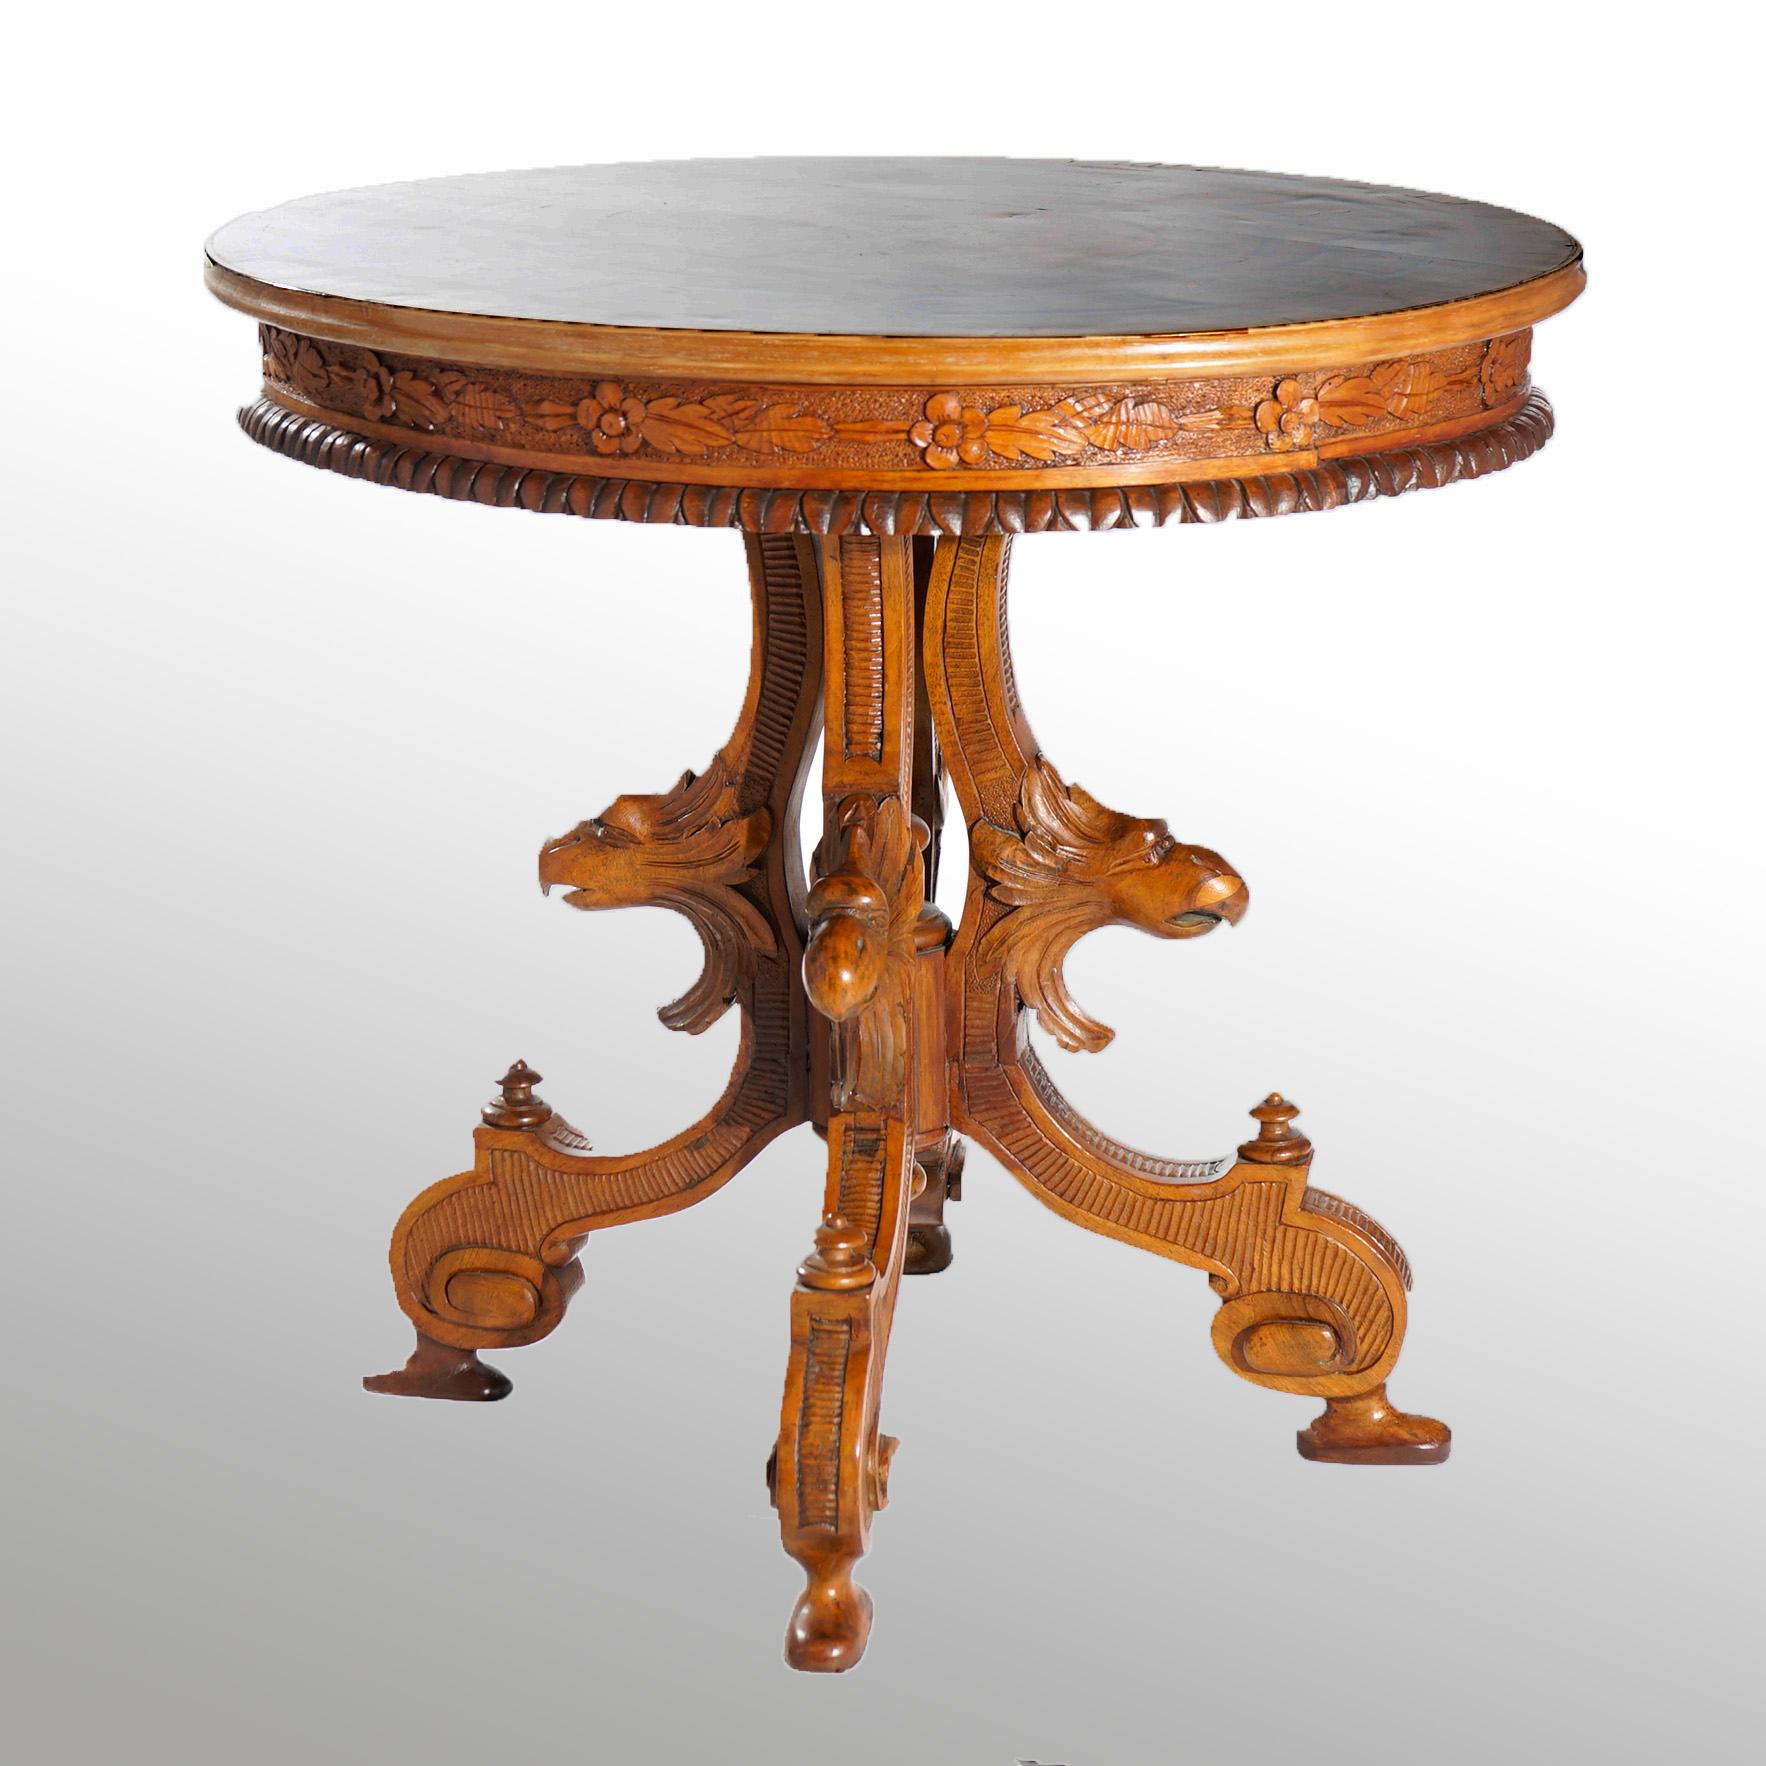 Wood Antique Classical Marquetry Inlaid & Figural Carved Kingwood Center Table 19th C For Sale